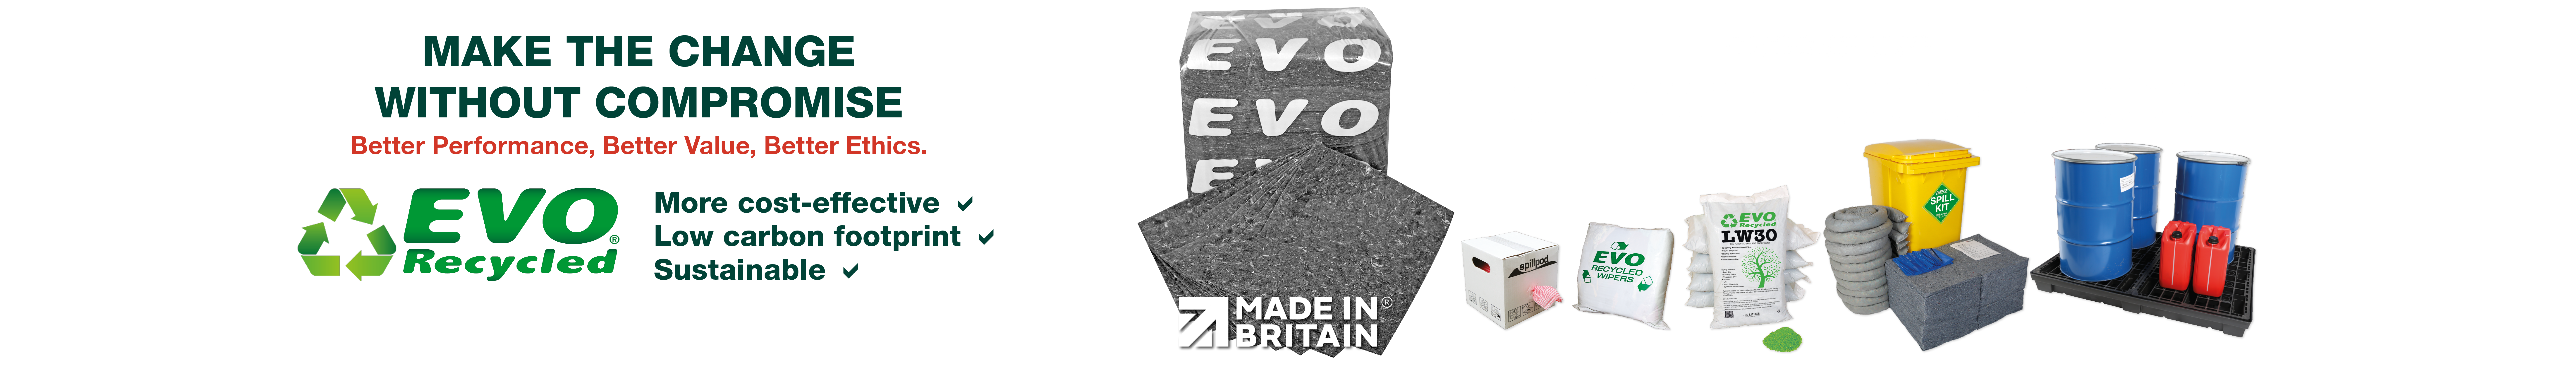 EVO Recycled Made in Britain